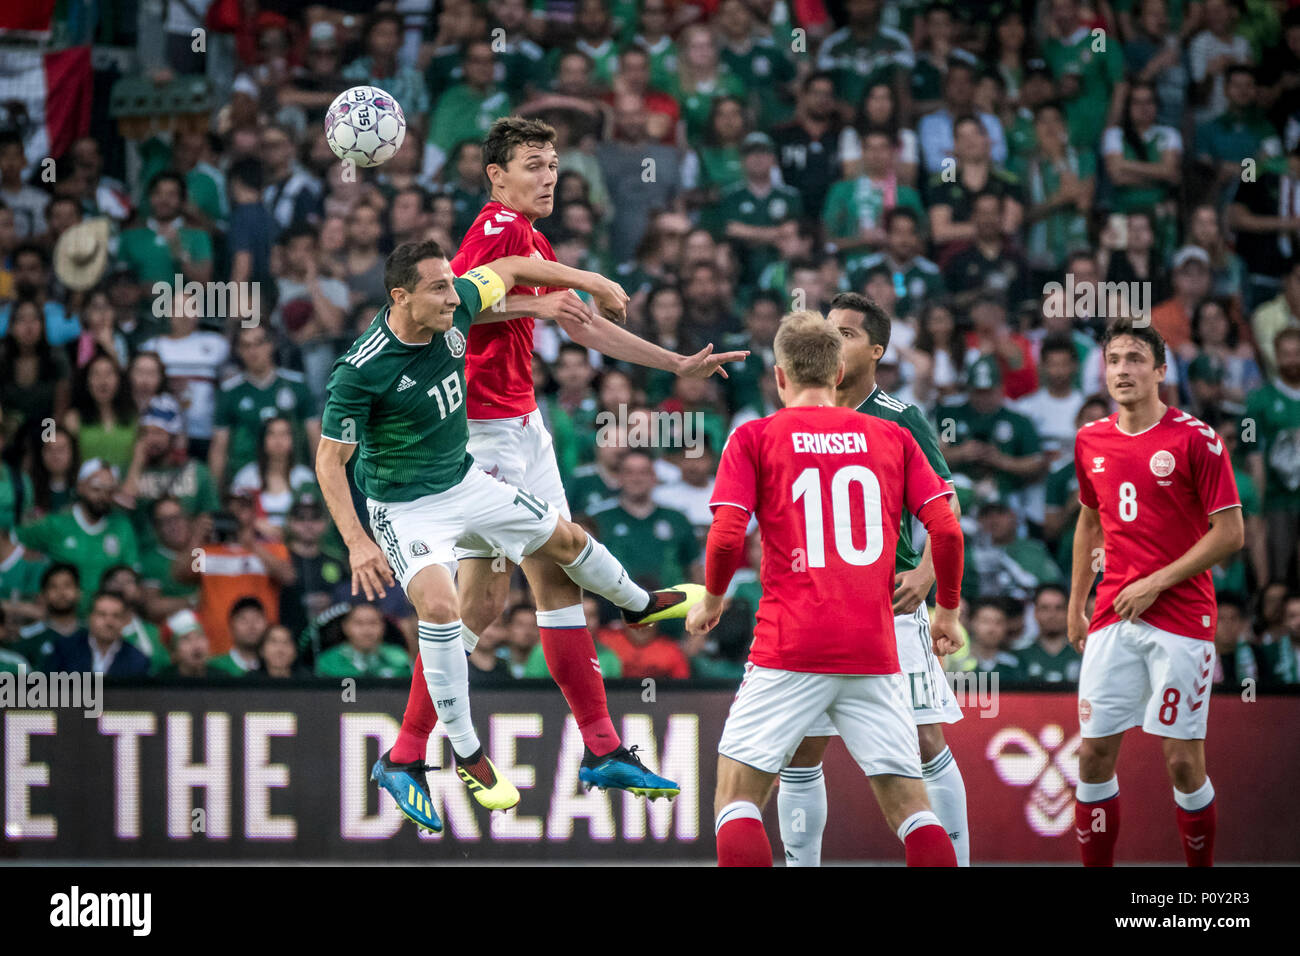 Denmark, Brøndby - June 09, 2018. Andreas Christensen (6) of Denmark and Andres Guardado (18) of Mexico seen during the football friendly between Denmark and Mexico at Brøndby Stadion. (Photo credit: Gonzales Photo - Kim M. Leland). Credit: Gonzales Photo/Alamy Live News Stock Photo